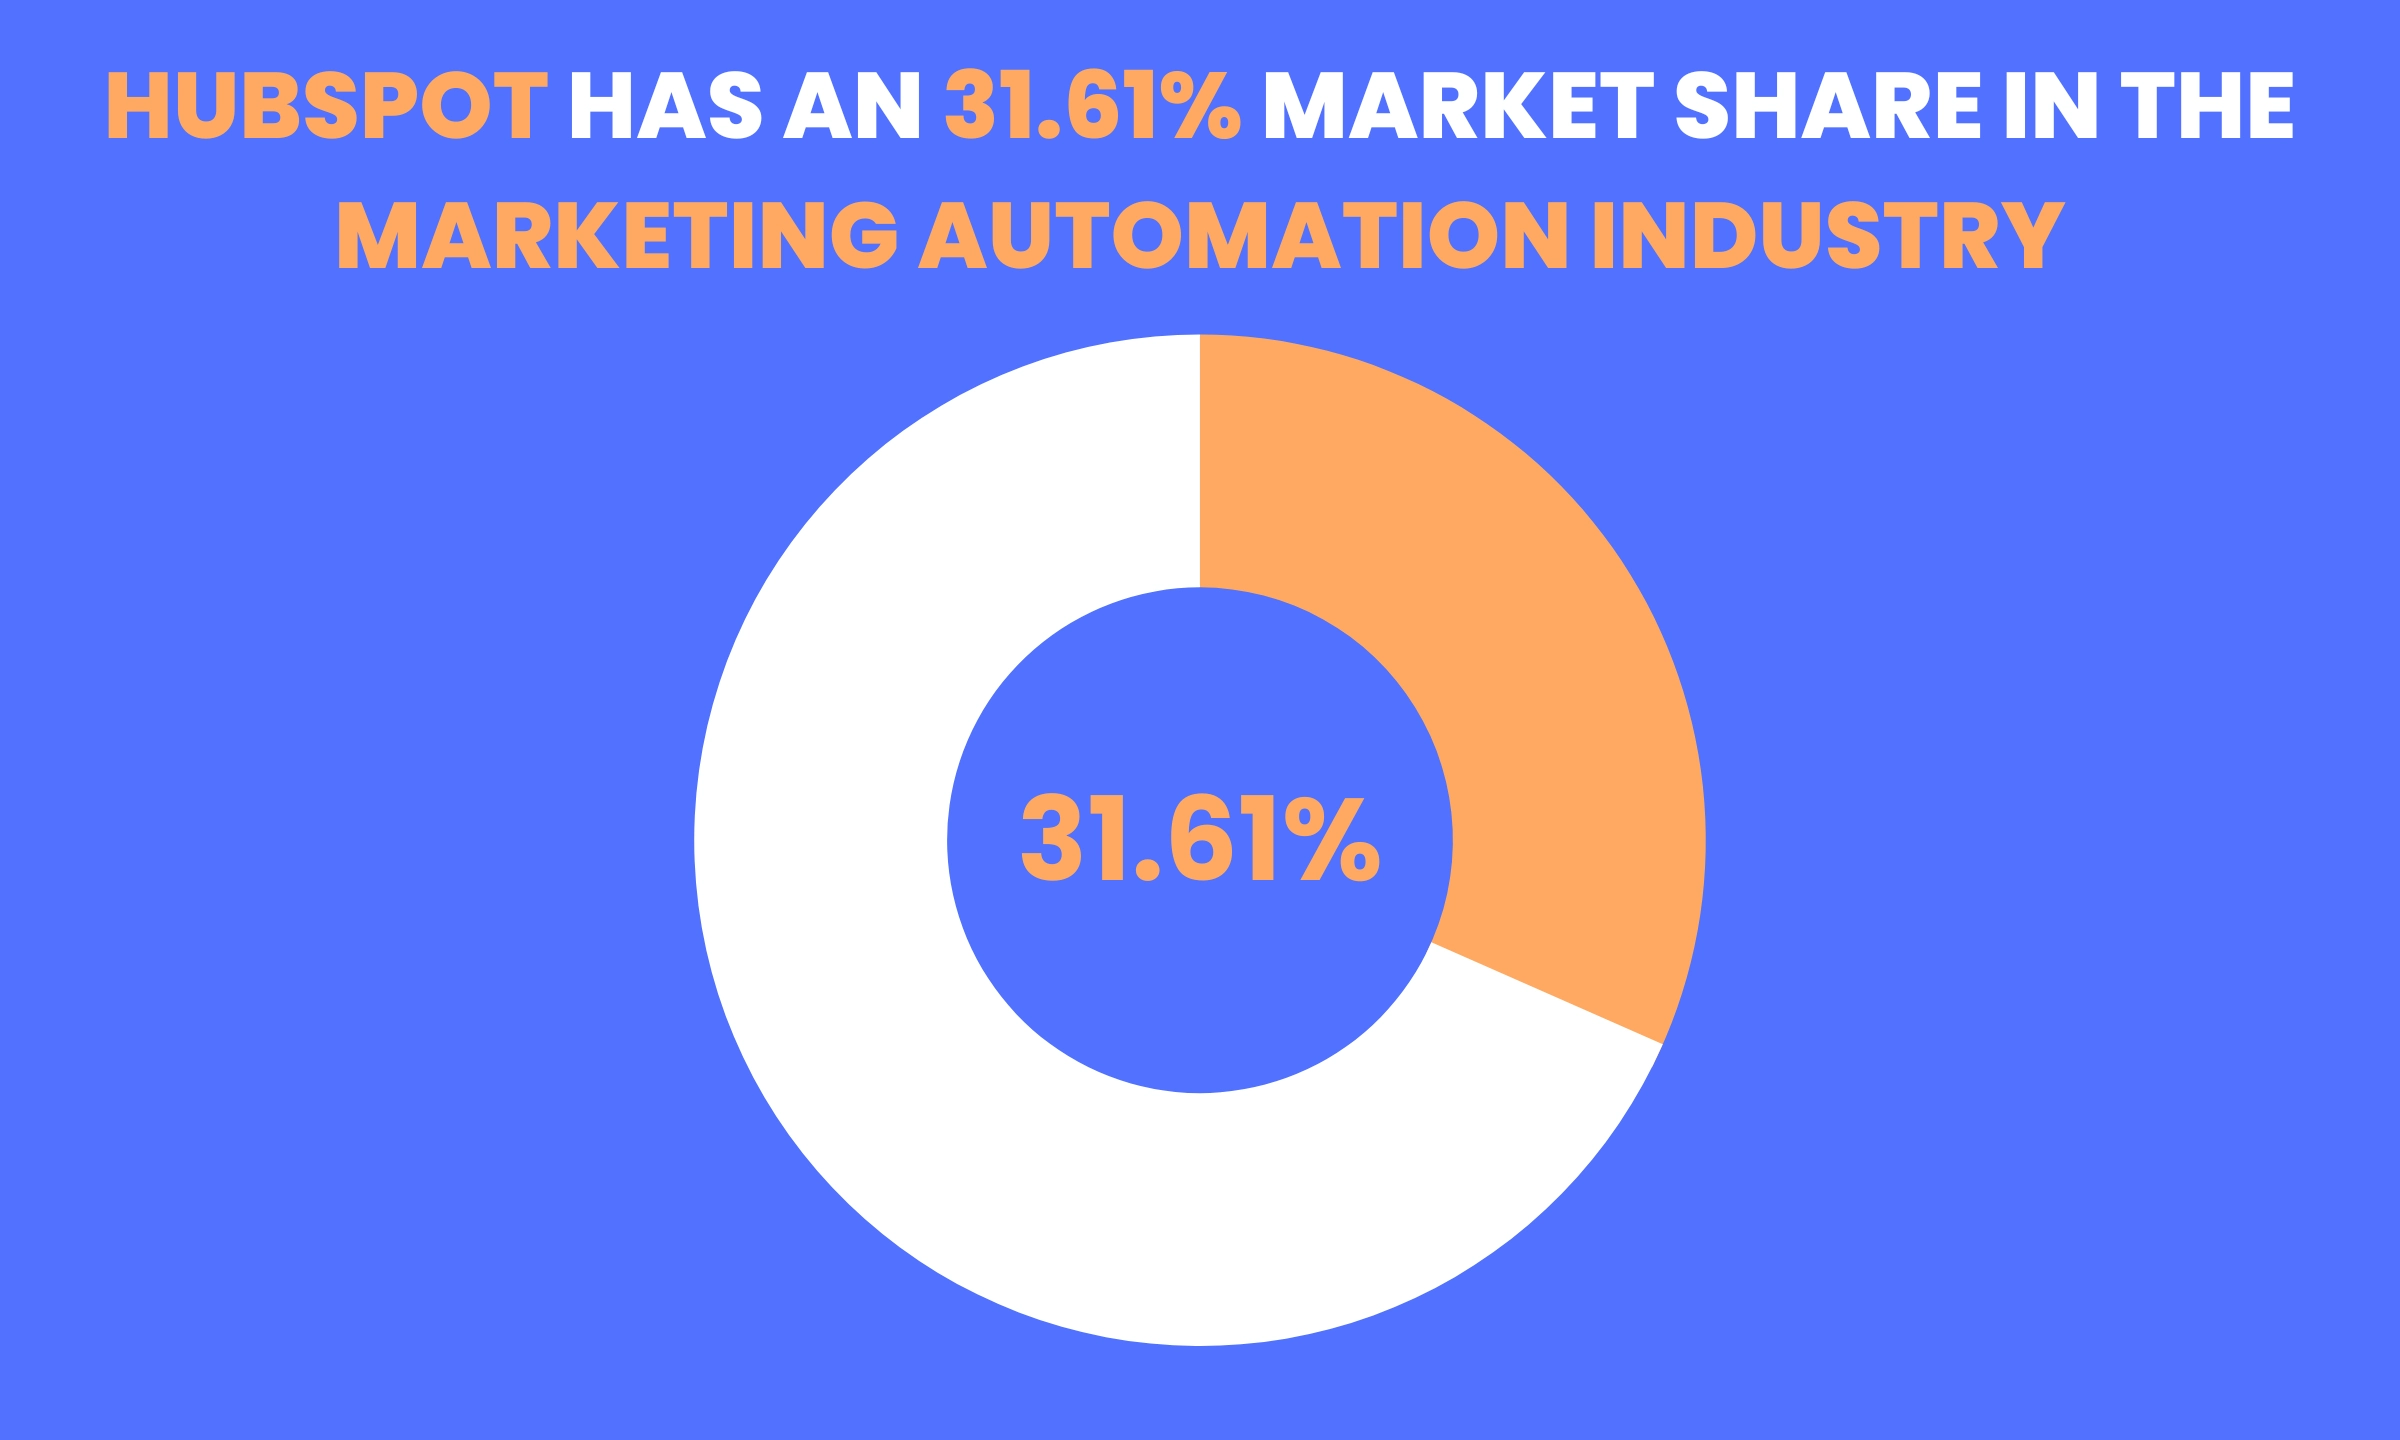 HubSpot's market share of 31.61% in the marketing automation industry